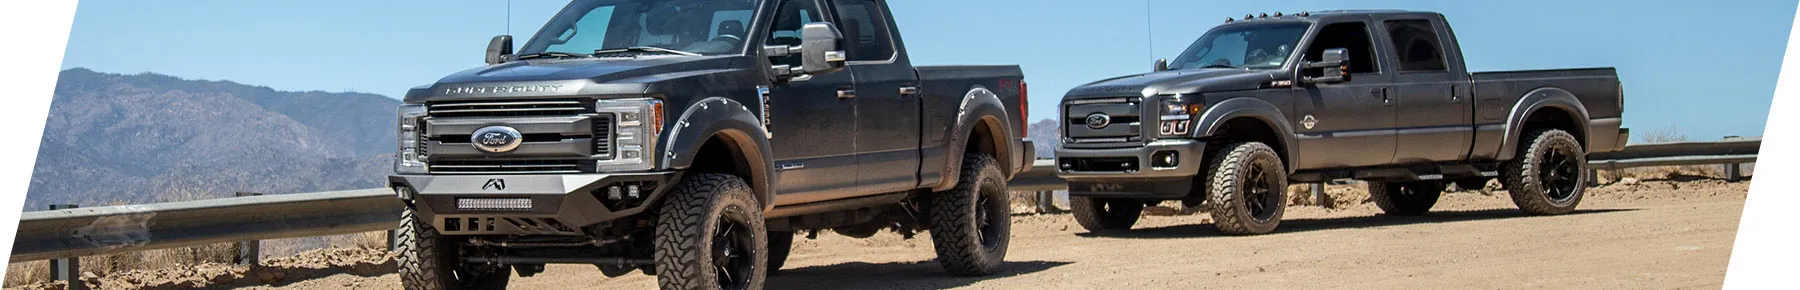 Super Duty Performance Parts at Stage 3!